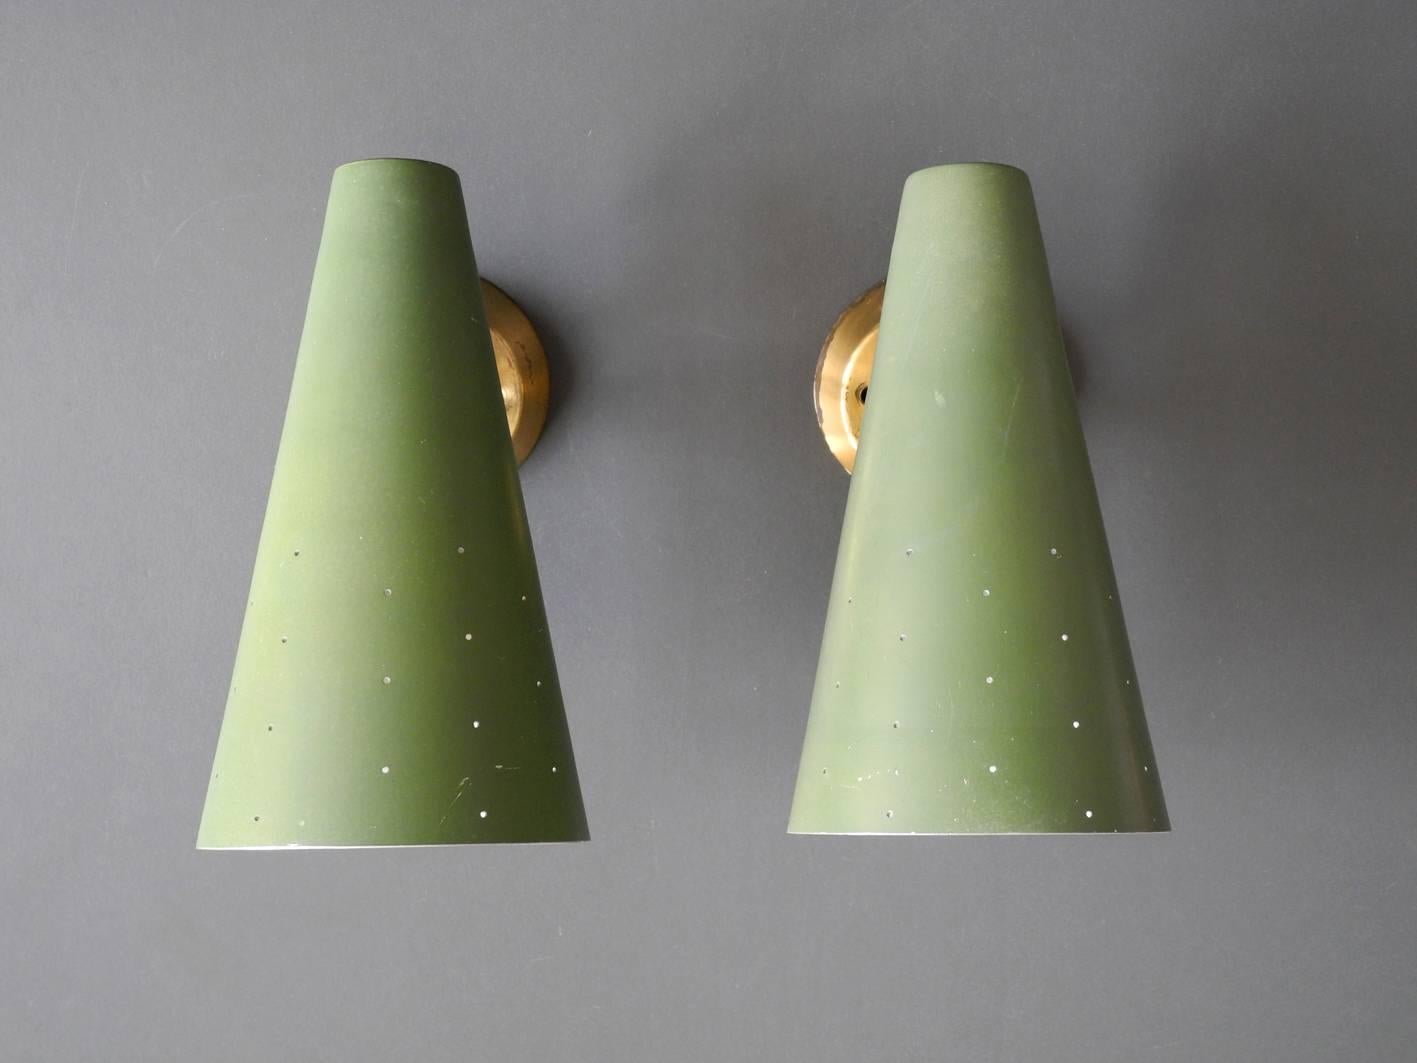 A pair of very elegant Italian midcentury cone lamps made of perforated metal.
Base is made of brass, cones are made of aluminum. Steplessly movable at the joint. Beautiful minimalistic Italian design for a very pleasant light.
Outside the shade